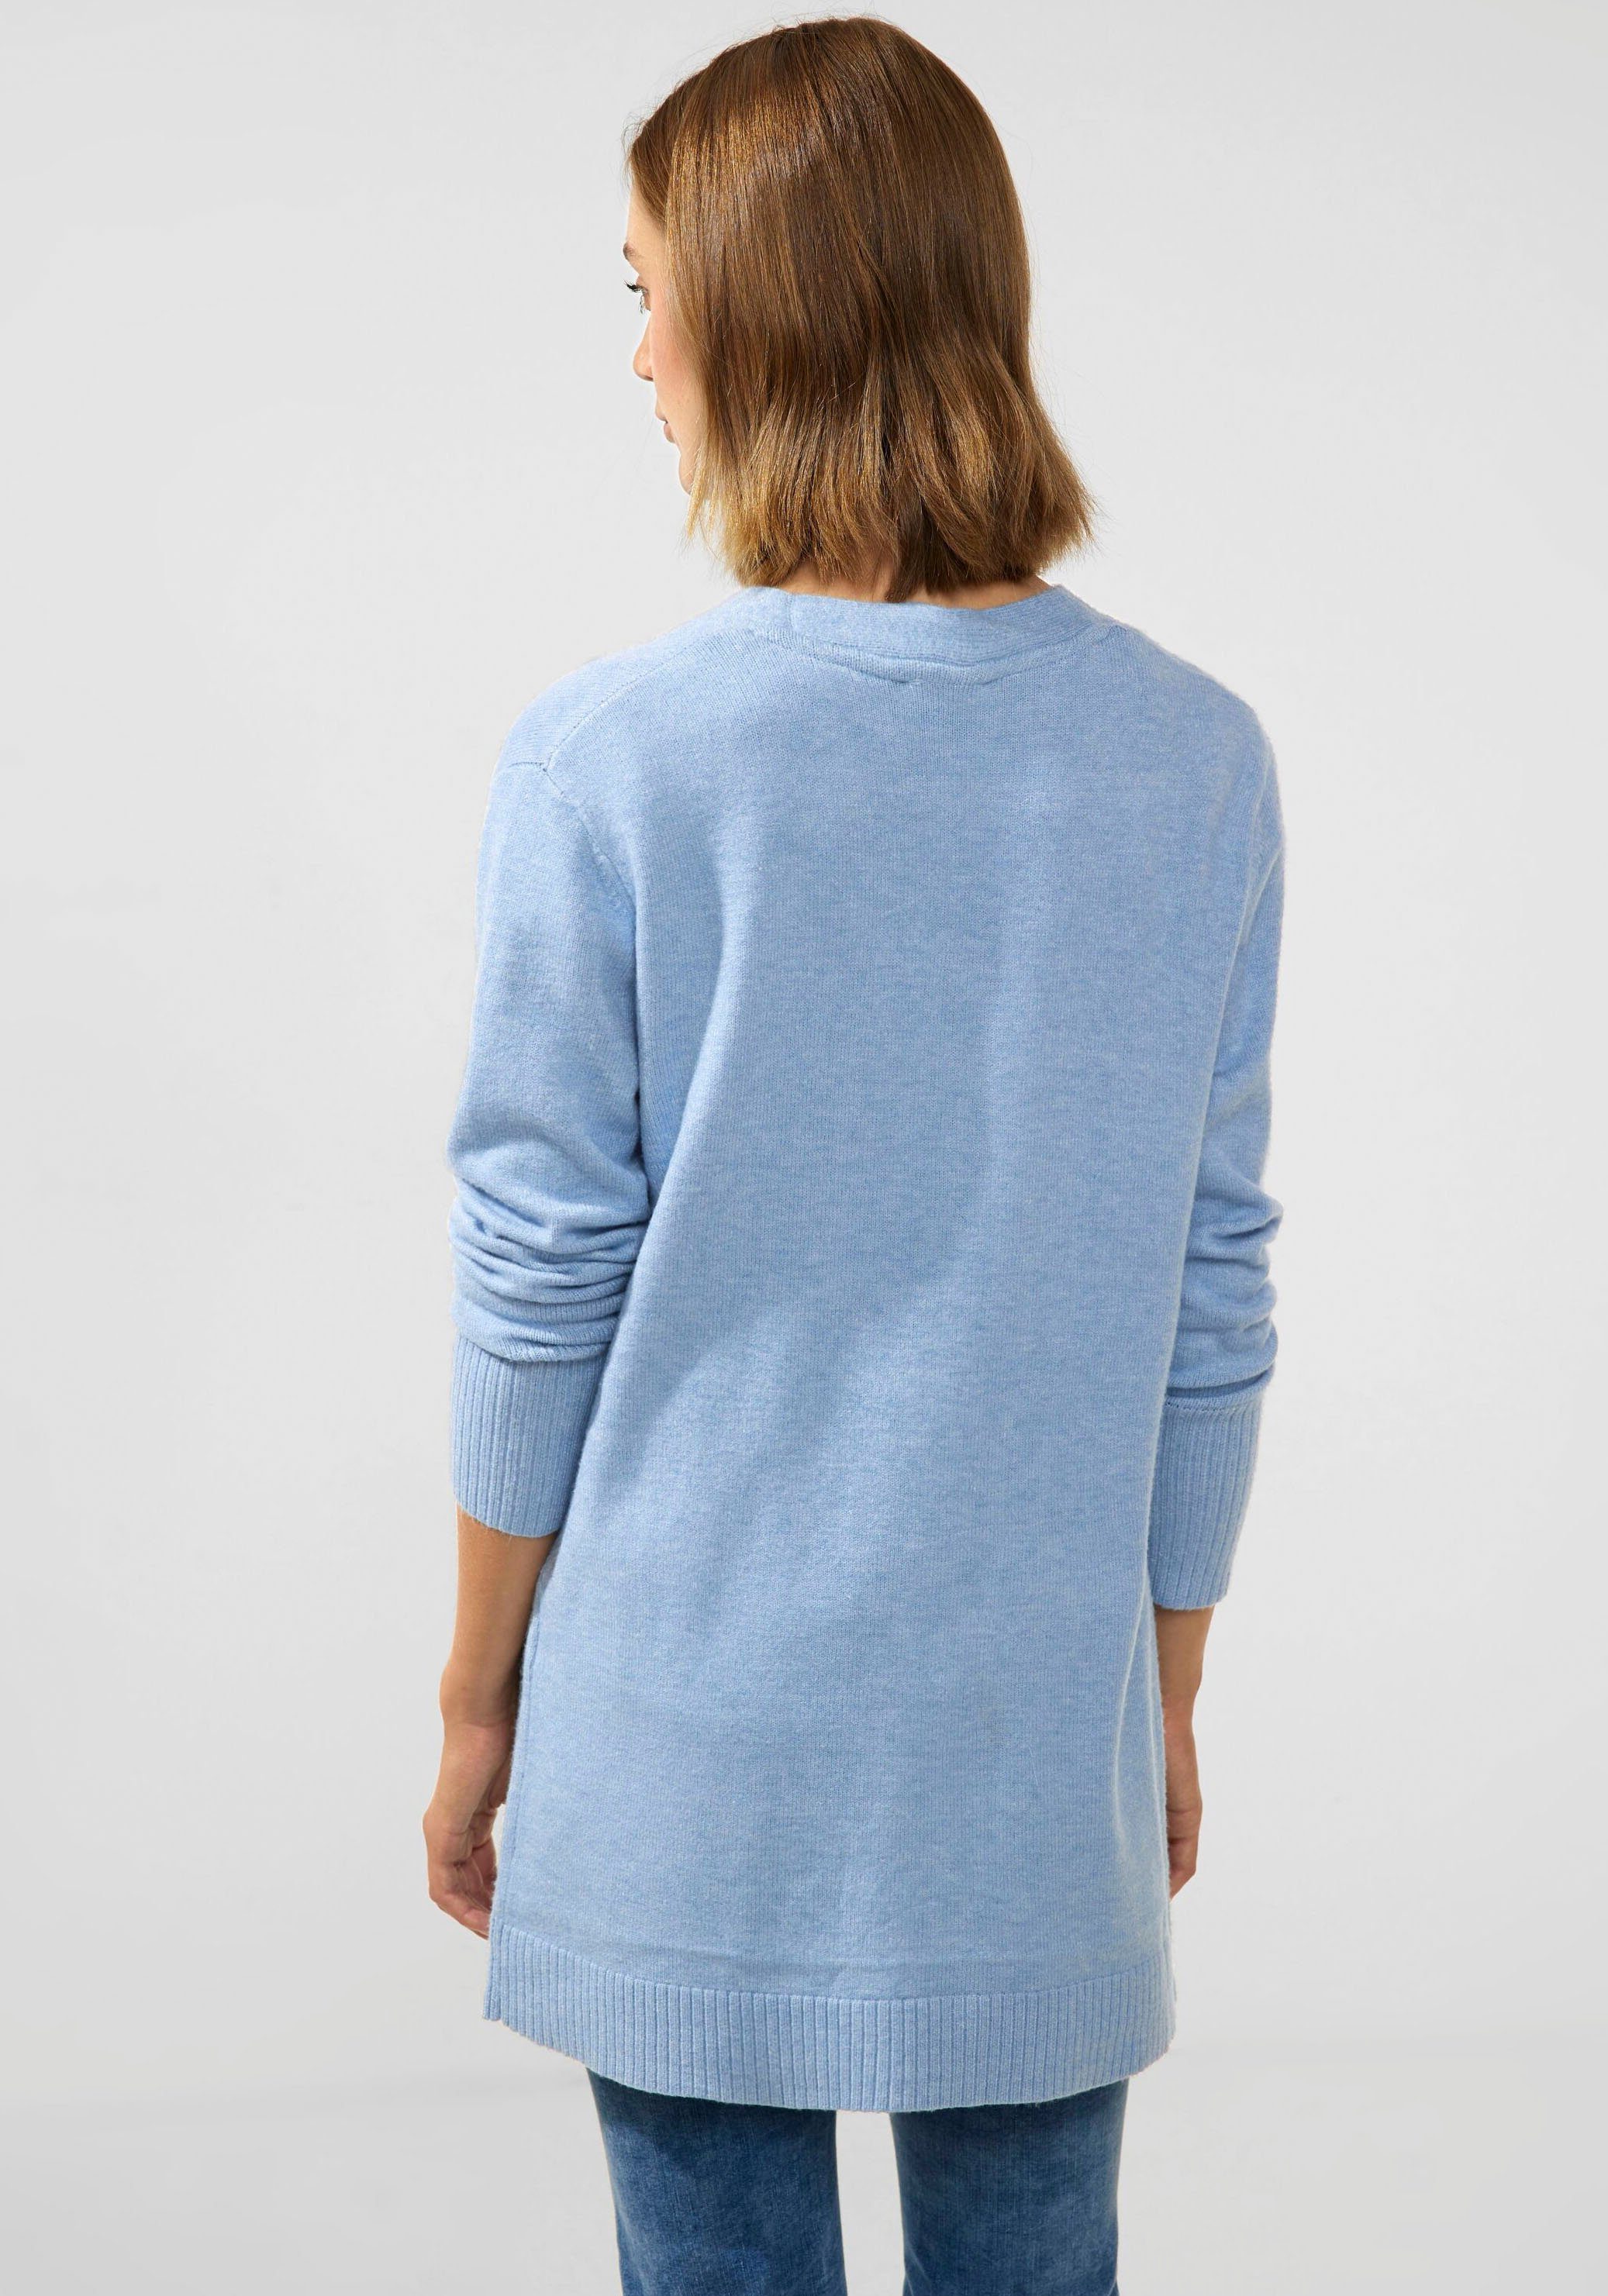 STREET ONE in Unifarbe feather Cardigan blue